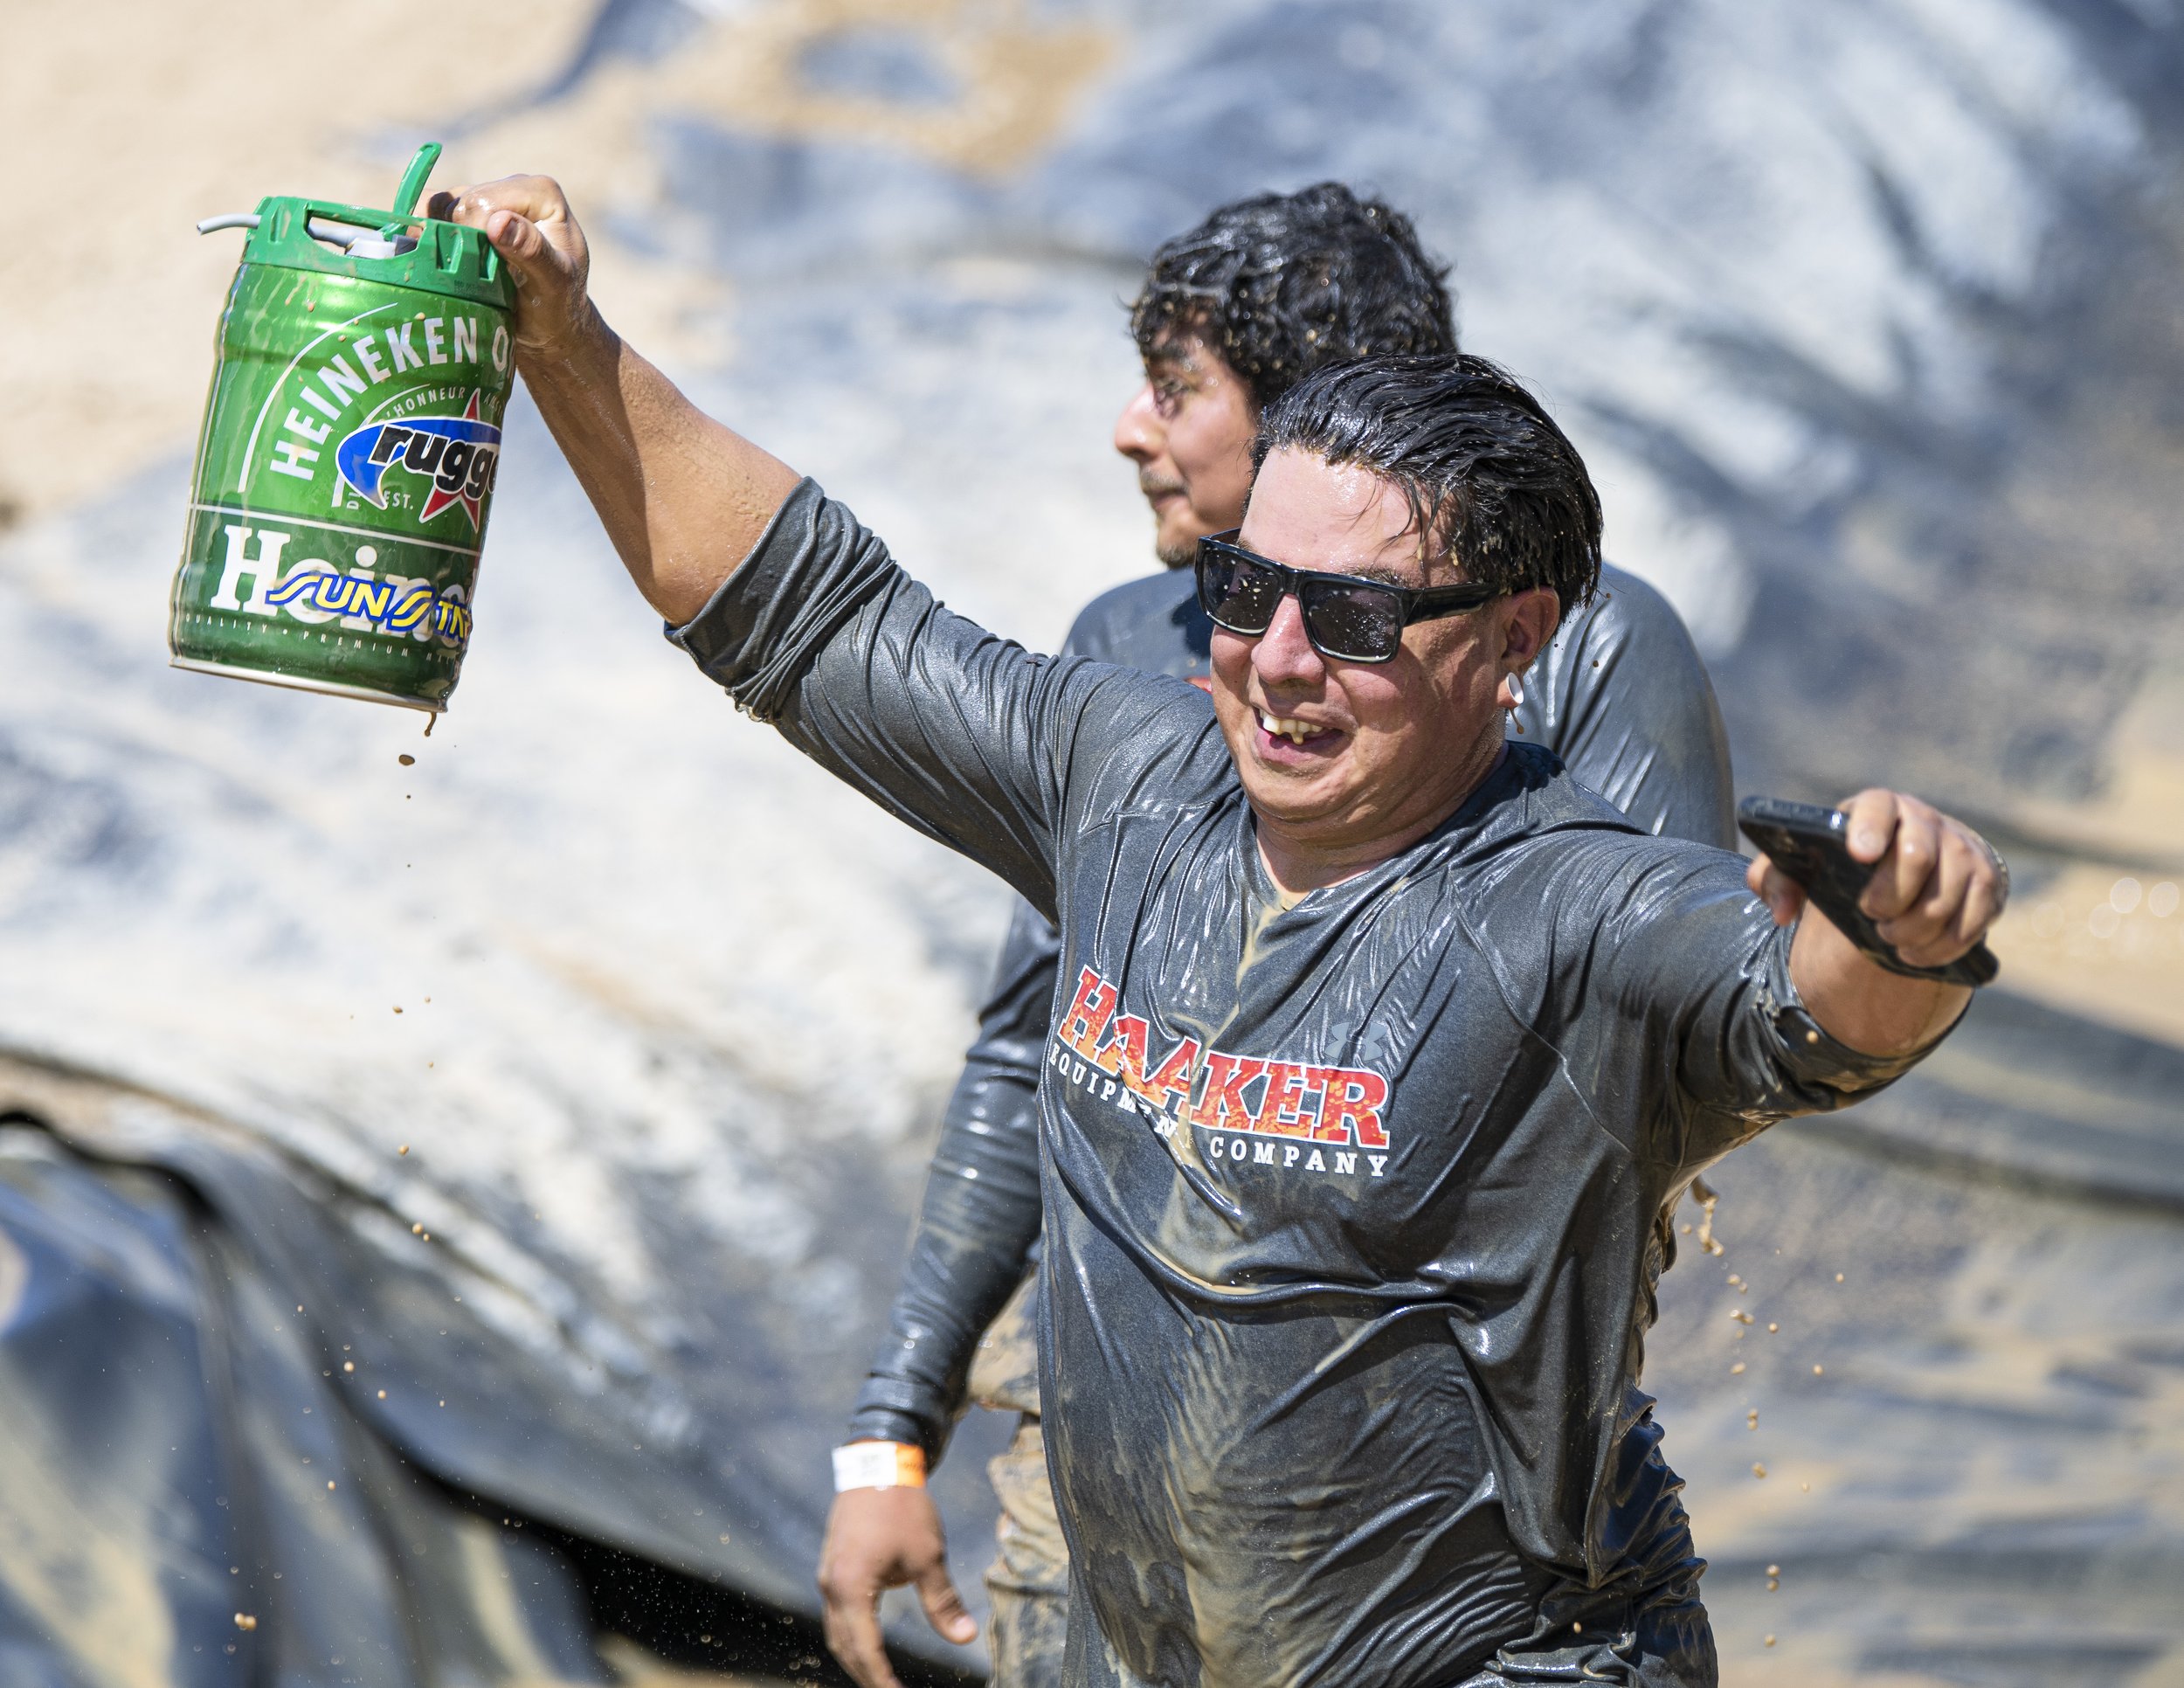  Bo Velasco from the HAAKER equipment group celebrates with his Heineken mini keg that he carried throughout the entirety of course, after successfully making it through the mud slide pit unscathed on April 9, 2022. (Jon Putman | The Corsair) 